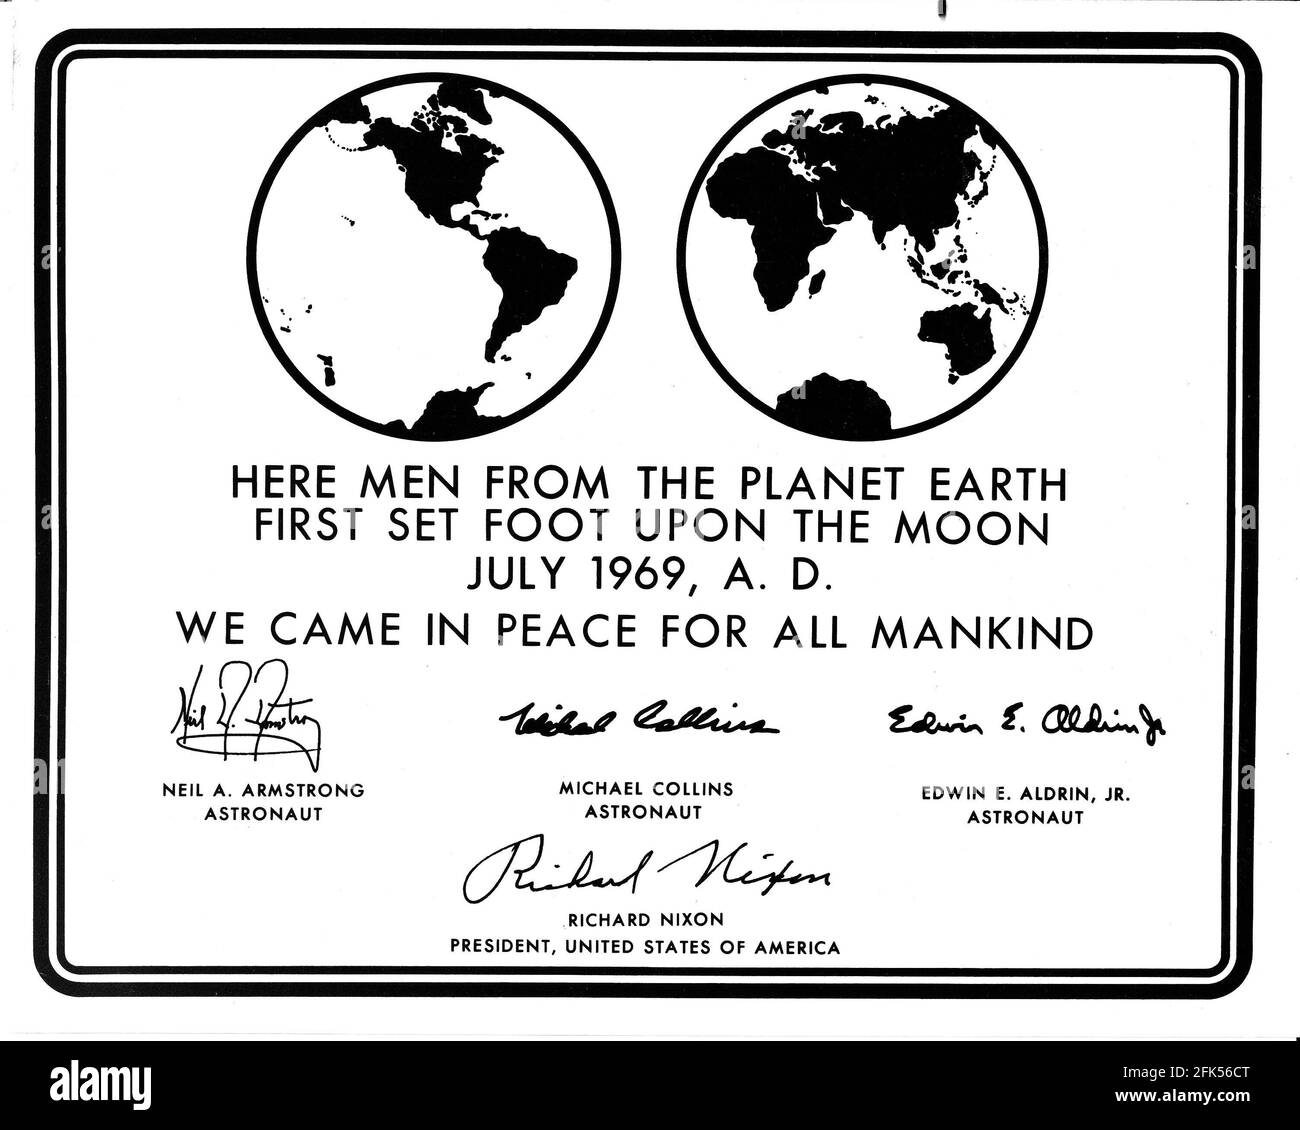 Washington, DC - (FILE) -- Drawing released on July 3, 1969 showing the Apollo 11 plaque with a simple four-line inscription left on the Moon by Astronauts Neil Armstrong and Edwin E. 'Buzz' Aldren after their landing on July 20, 1969. It is affixed to one of the legs of the Lunar Module (LM) Eagle.Credit: NASA via CNP /MediaPunch Stock Photo